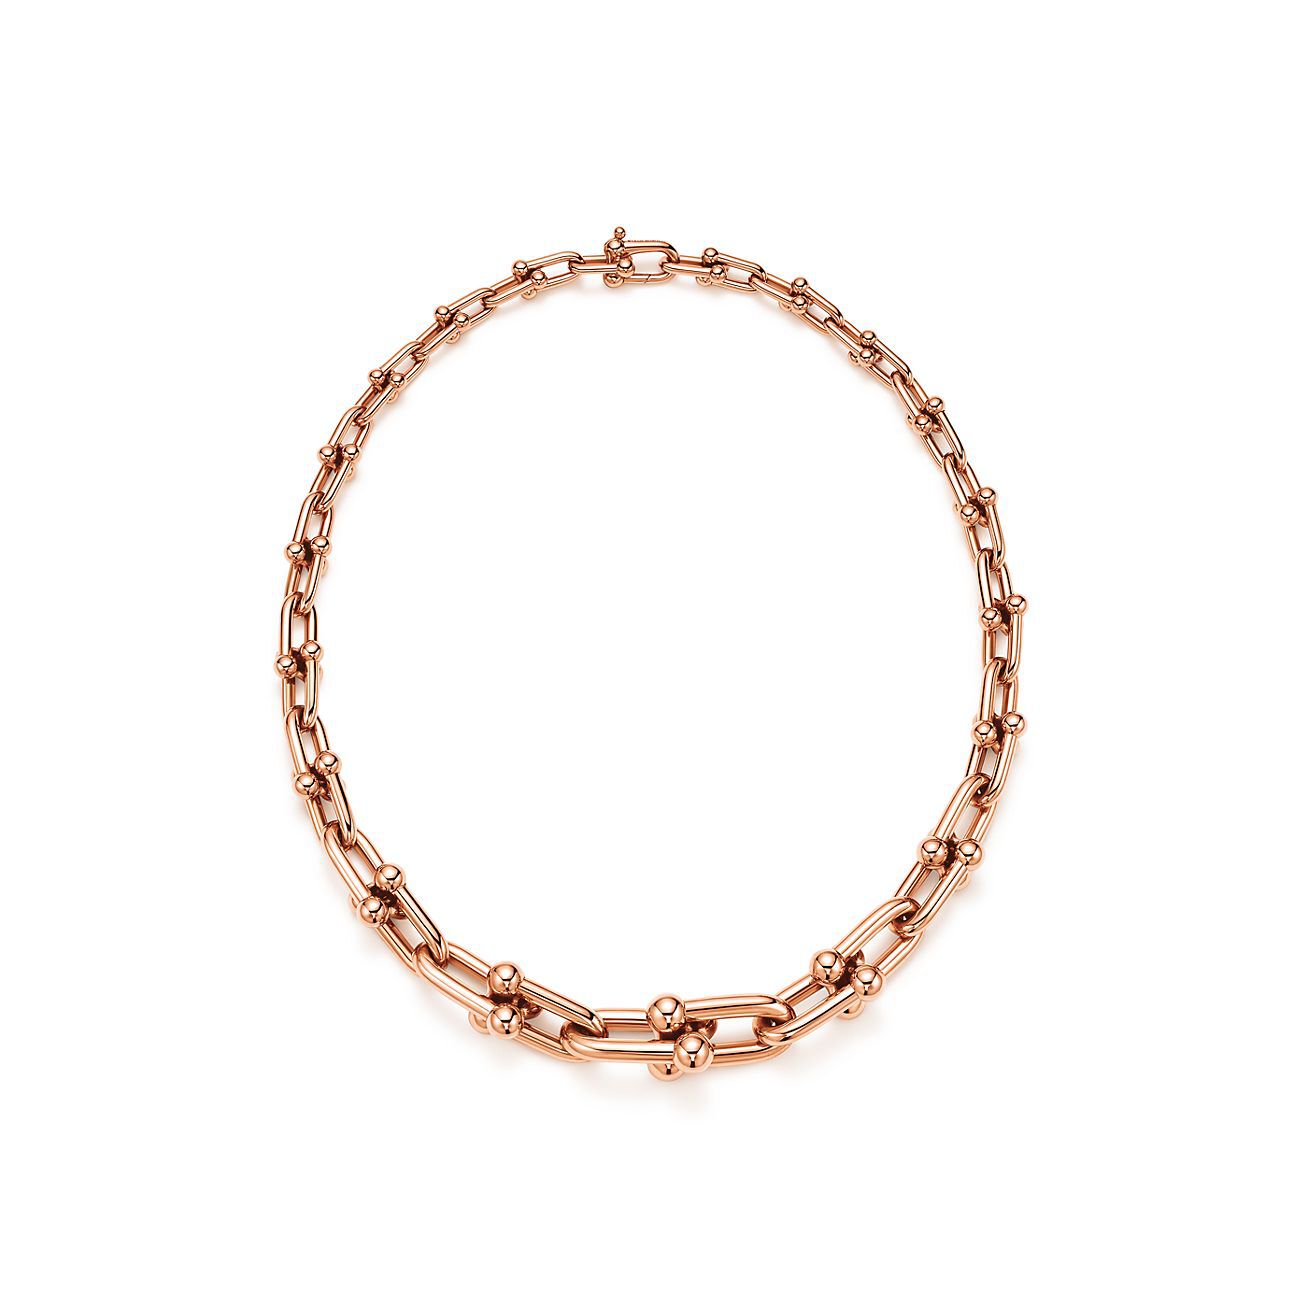 Tiffany And Co Tiffany Hardwear Graduated Link Necklace In 18k Rose Gold Necklaces Heathrow